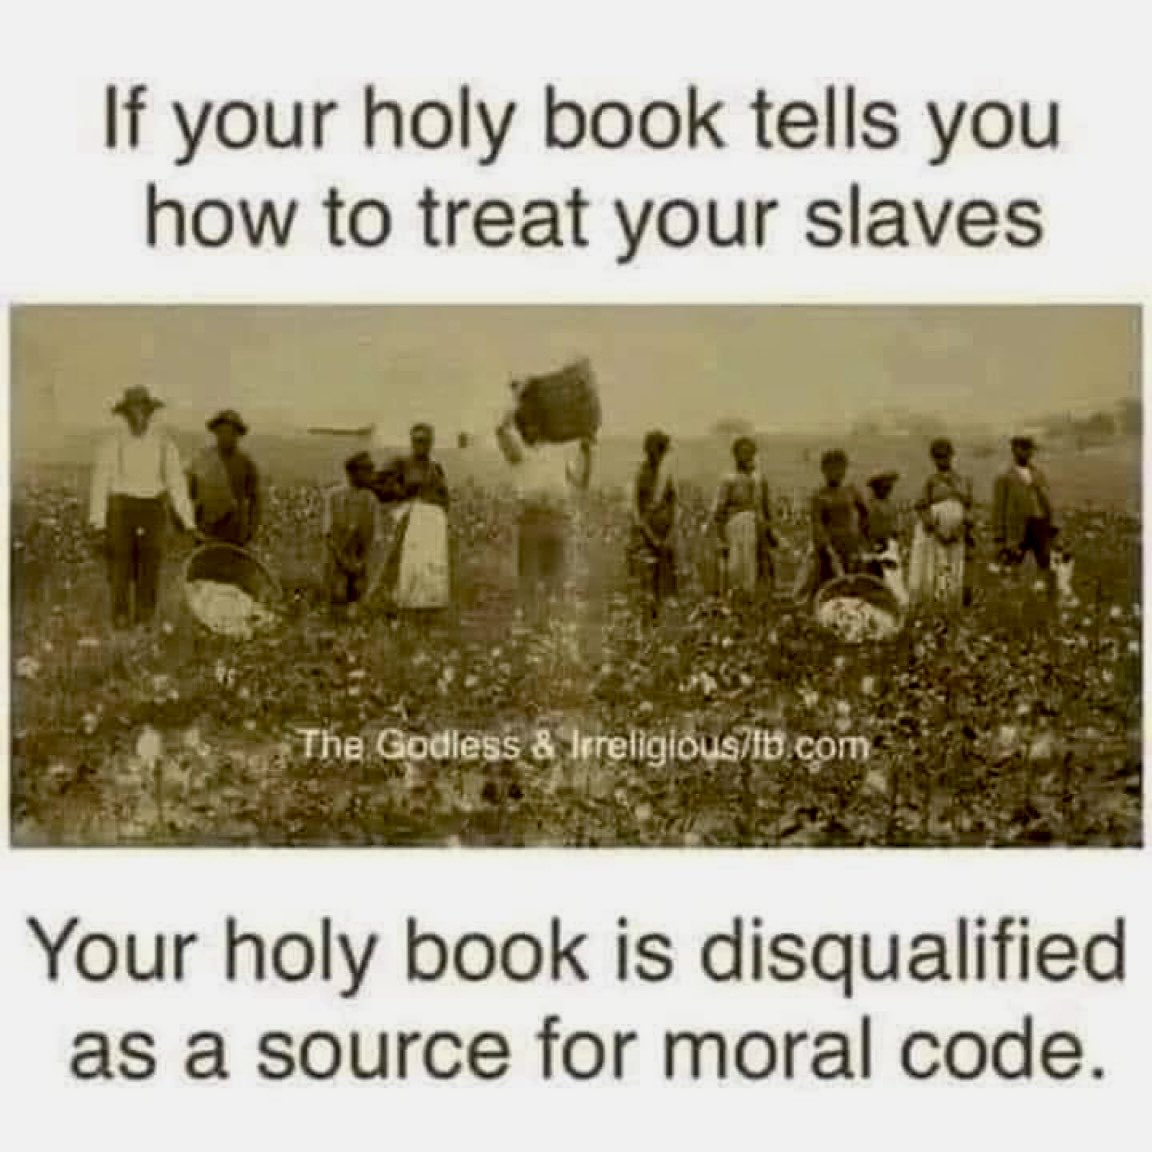 Christians ✝️ are mentally enslaved by a tome of terror. They hold no moral high ground over others. FuKKK their god and FuKKK religion.